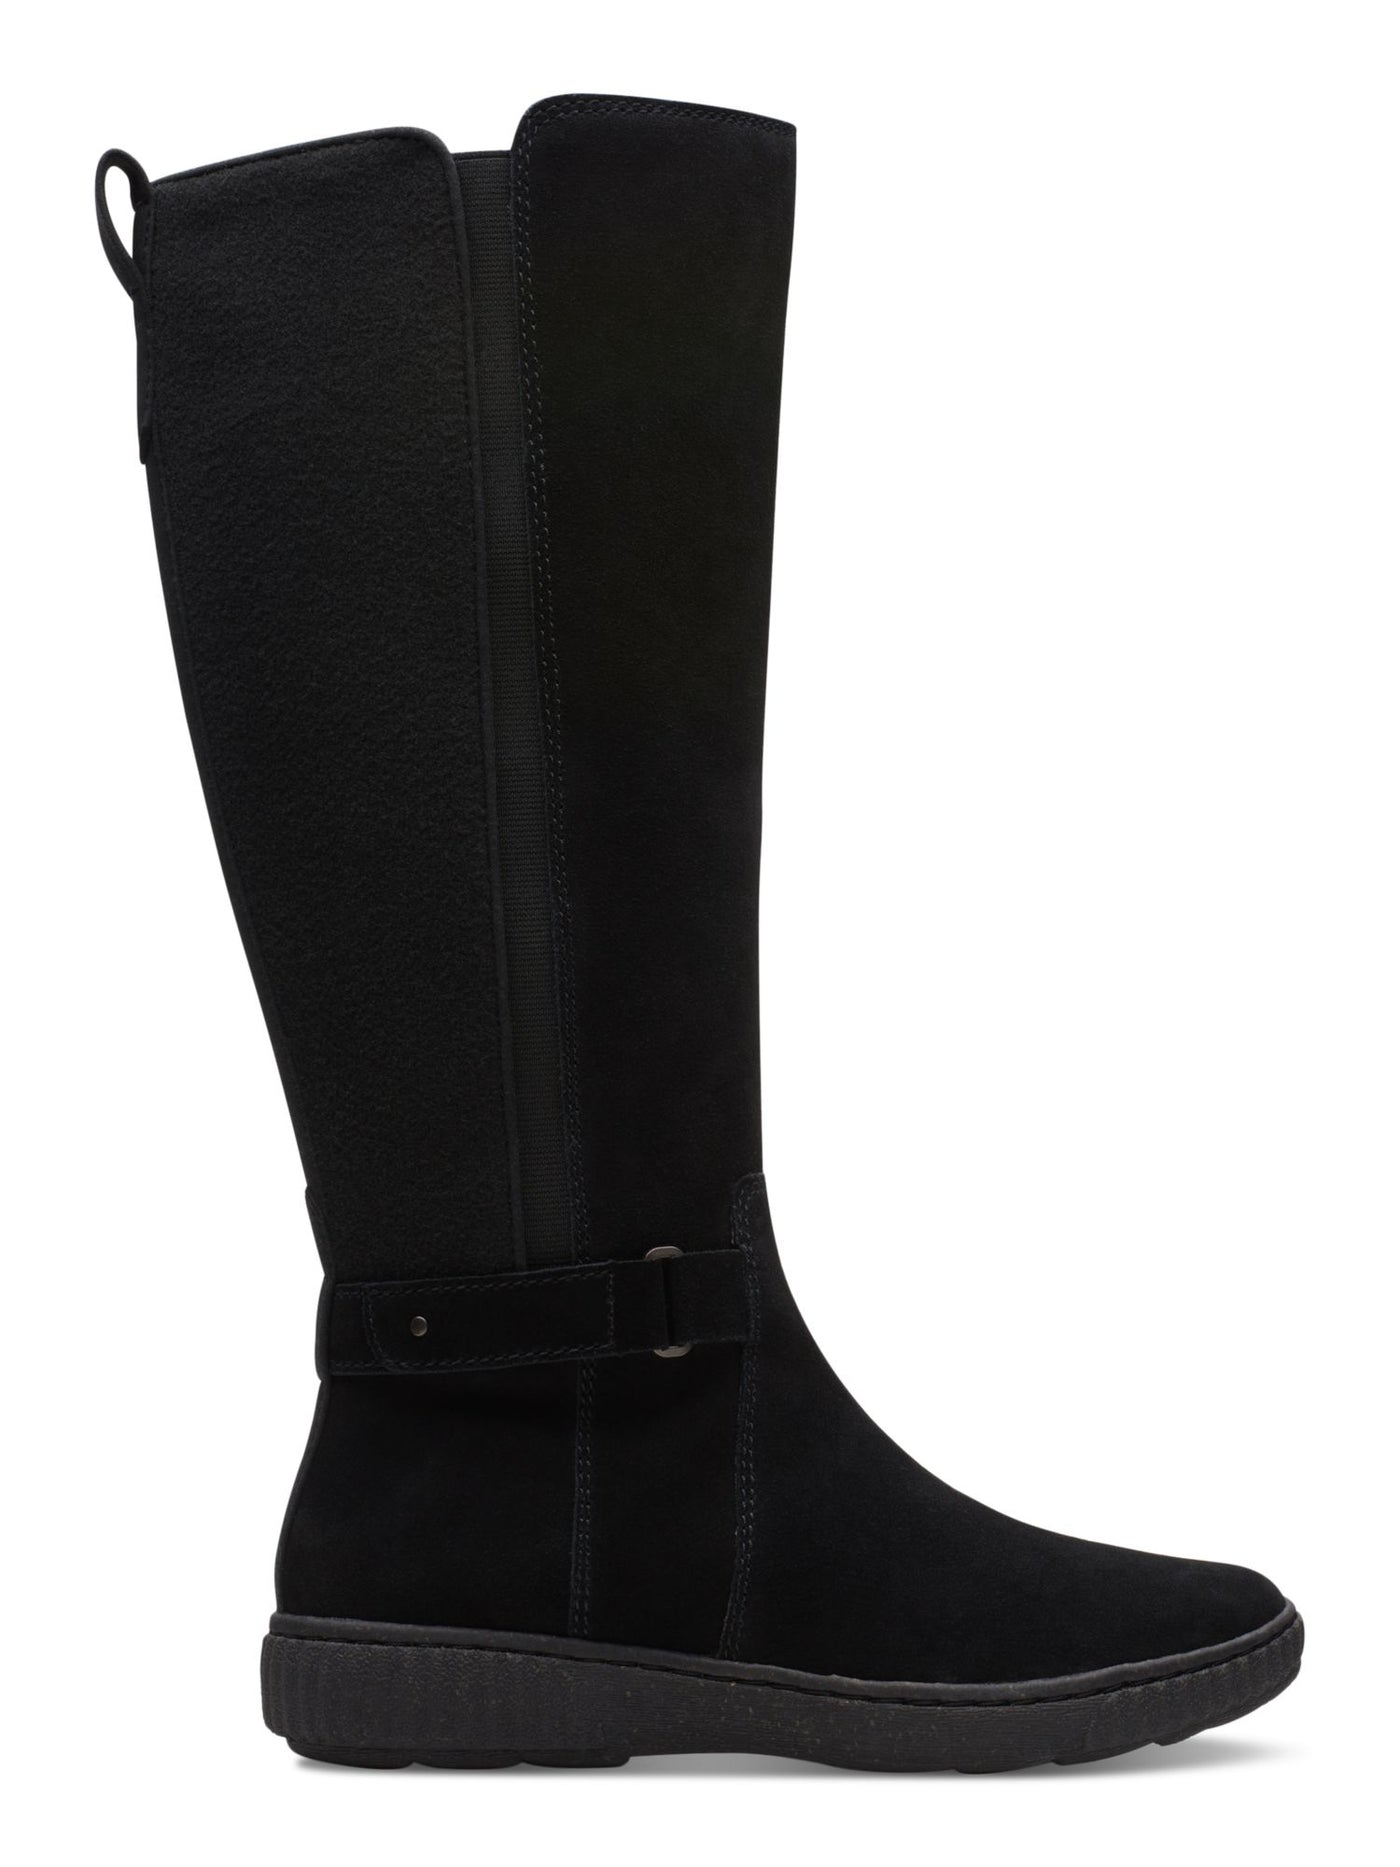 COLLECTION BY CLARKS Womens Black Goring Pull Tab Cushioned Button Accent Caroline Round Toe Platform Zip-Up Riding Boot 10 M